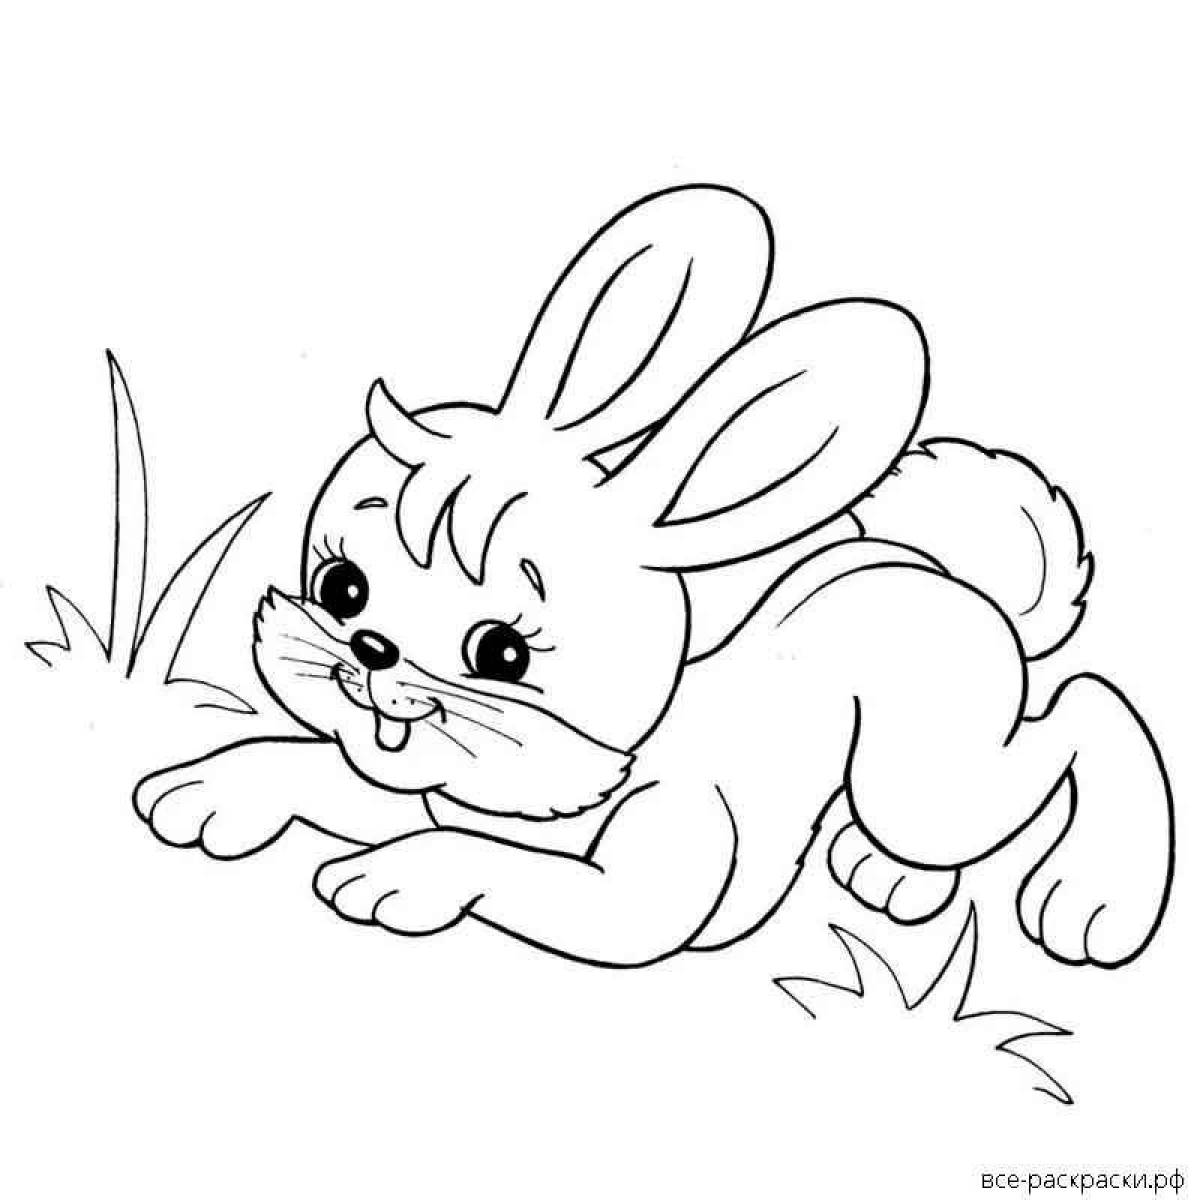 Adorable bunny drawing coloring book